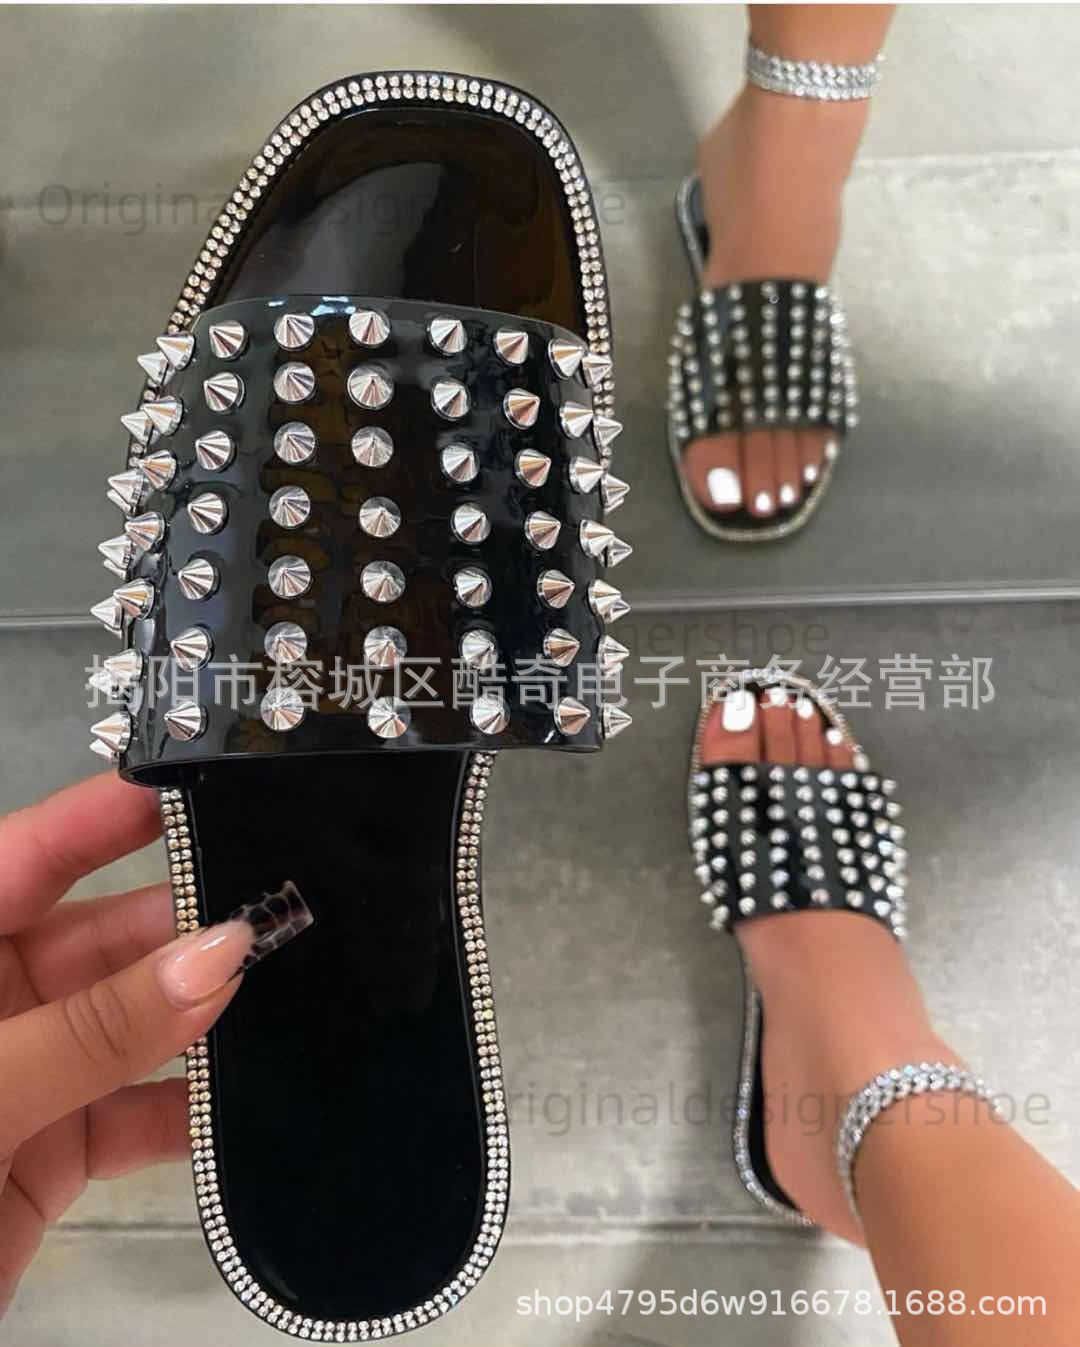 Liuding Crystal Shoes